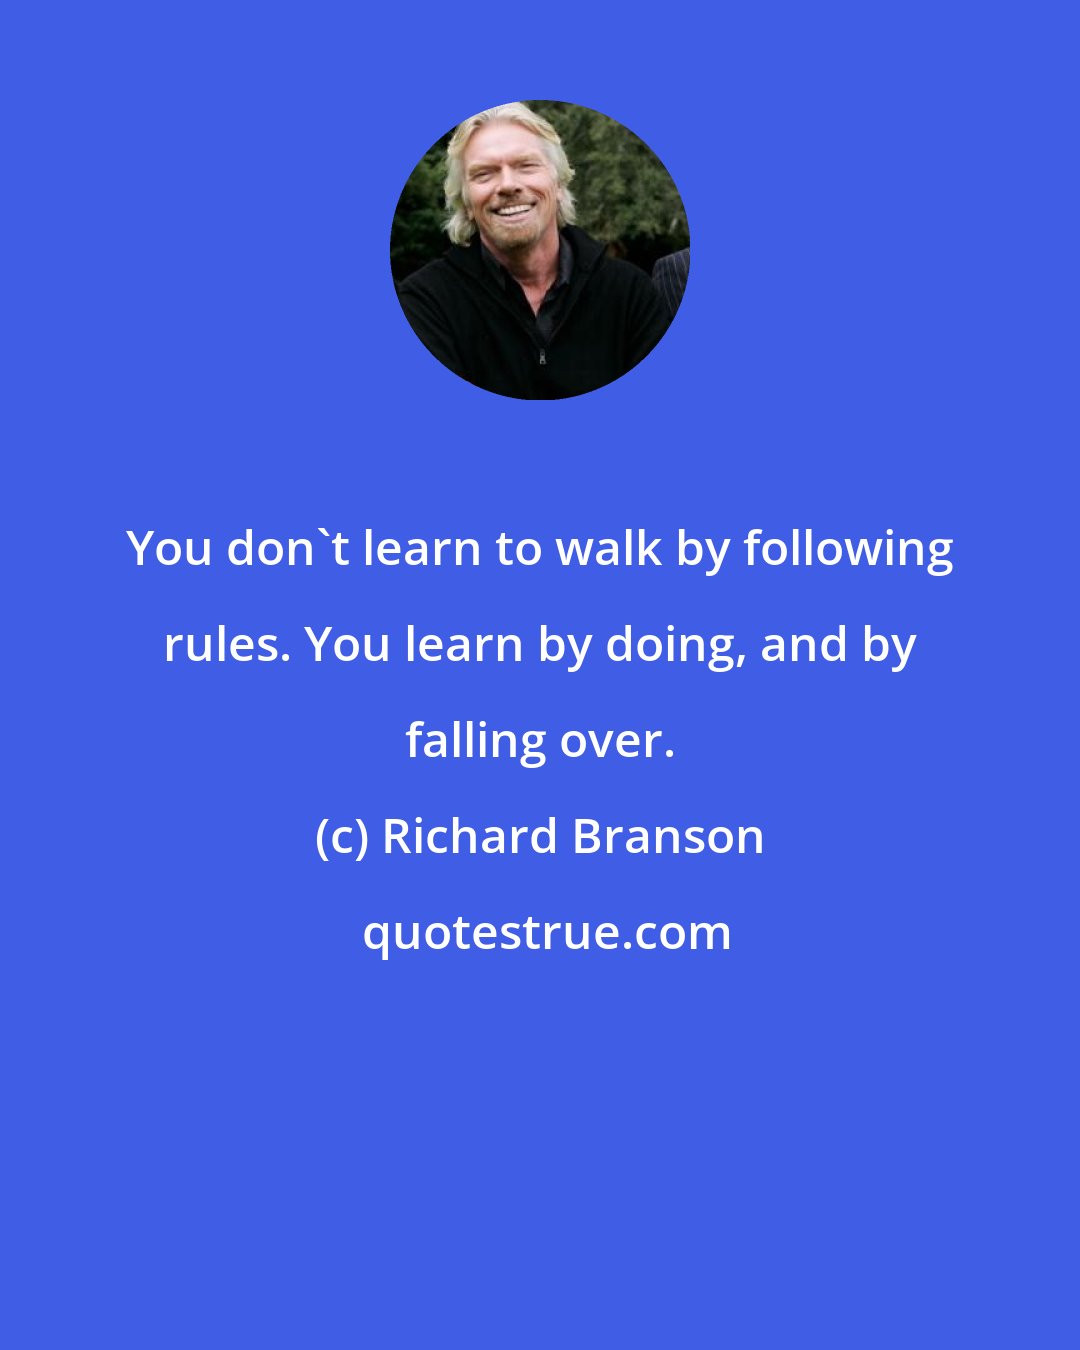 Richard Branson: You don't learn to walk by following rules. You learn by doing, and by falling over.